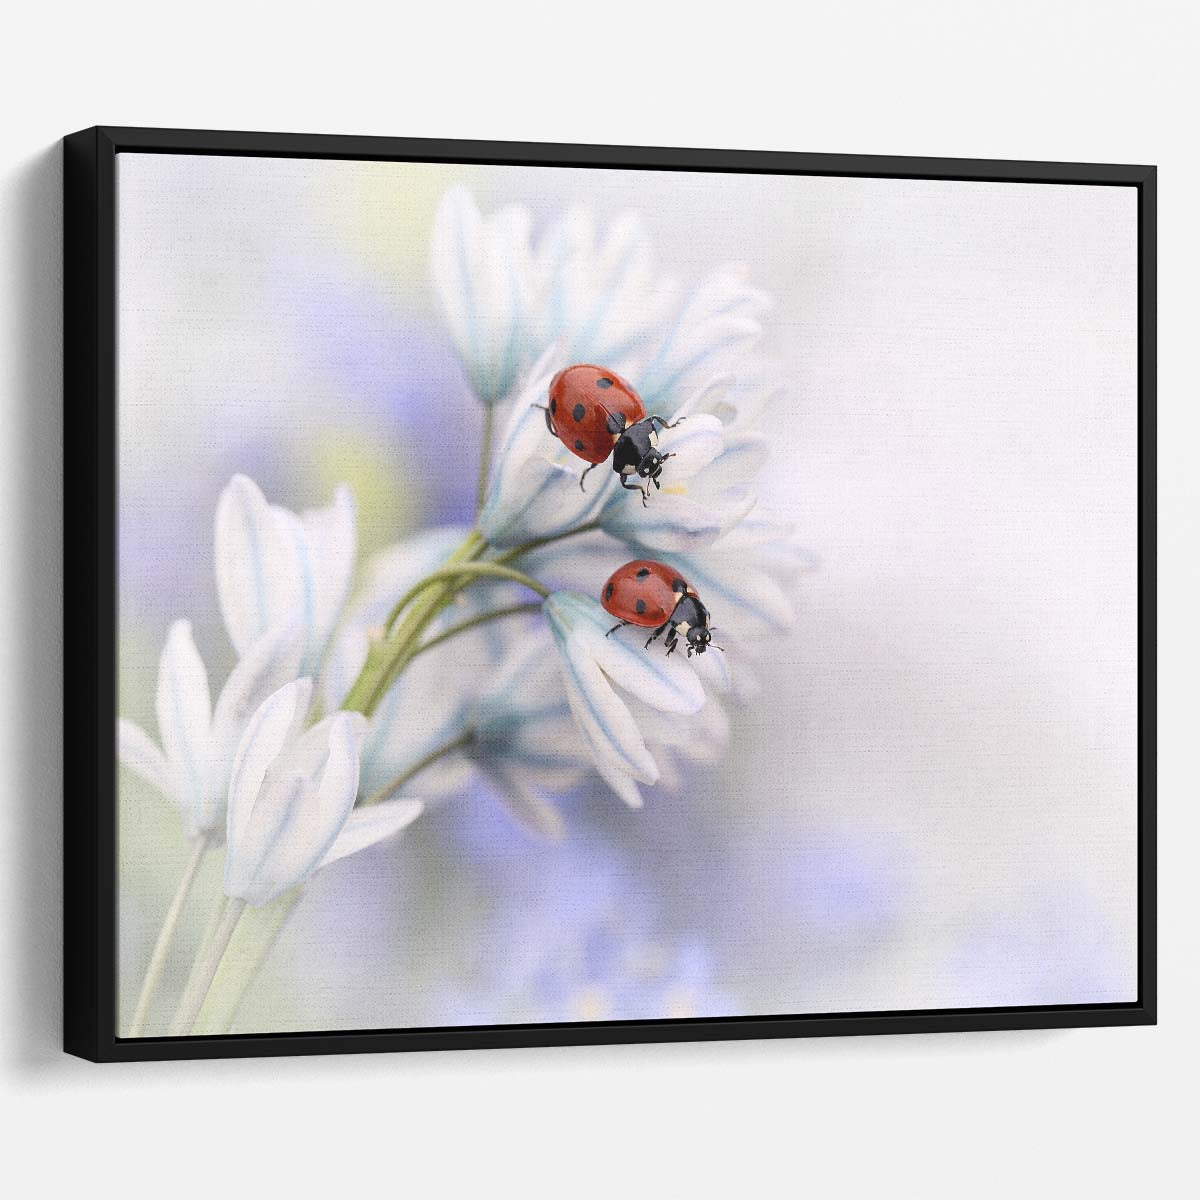 Romantic Ladybird Duo on Delicate Flower Wall Art by Luxuriance Designs. Made in USA.